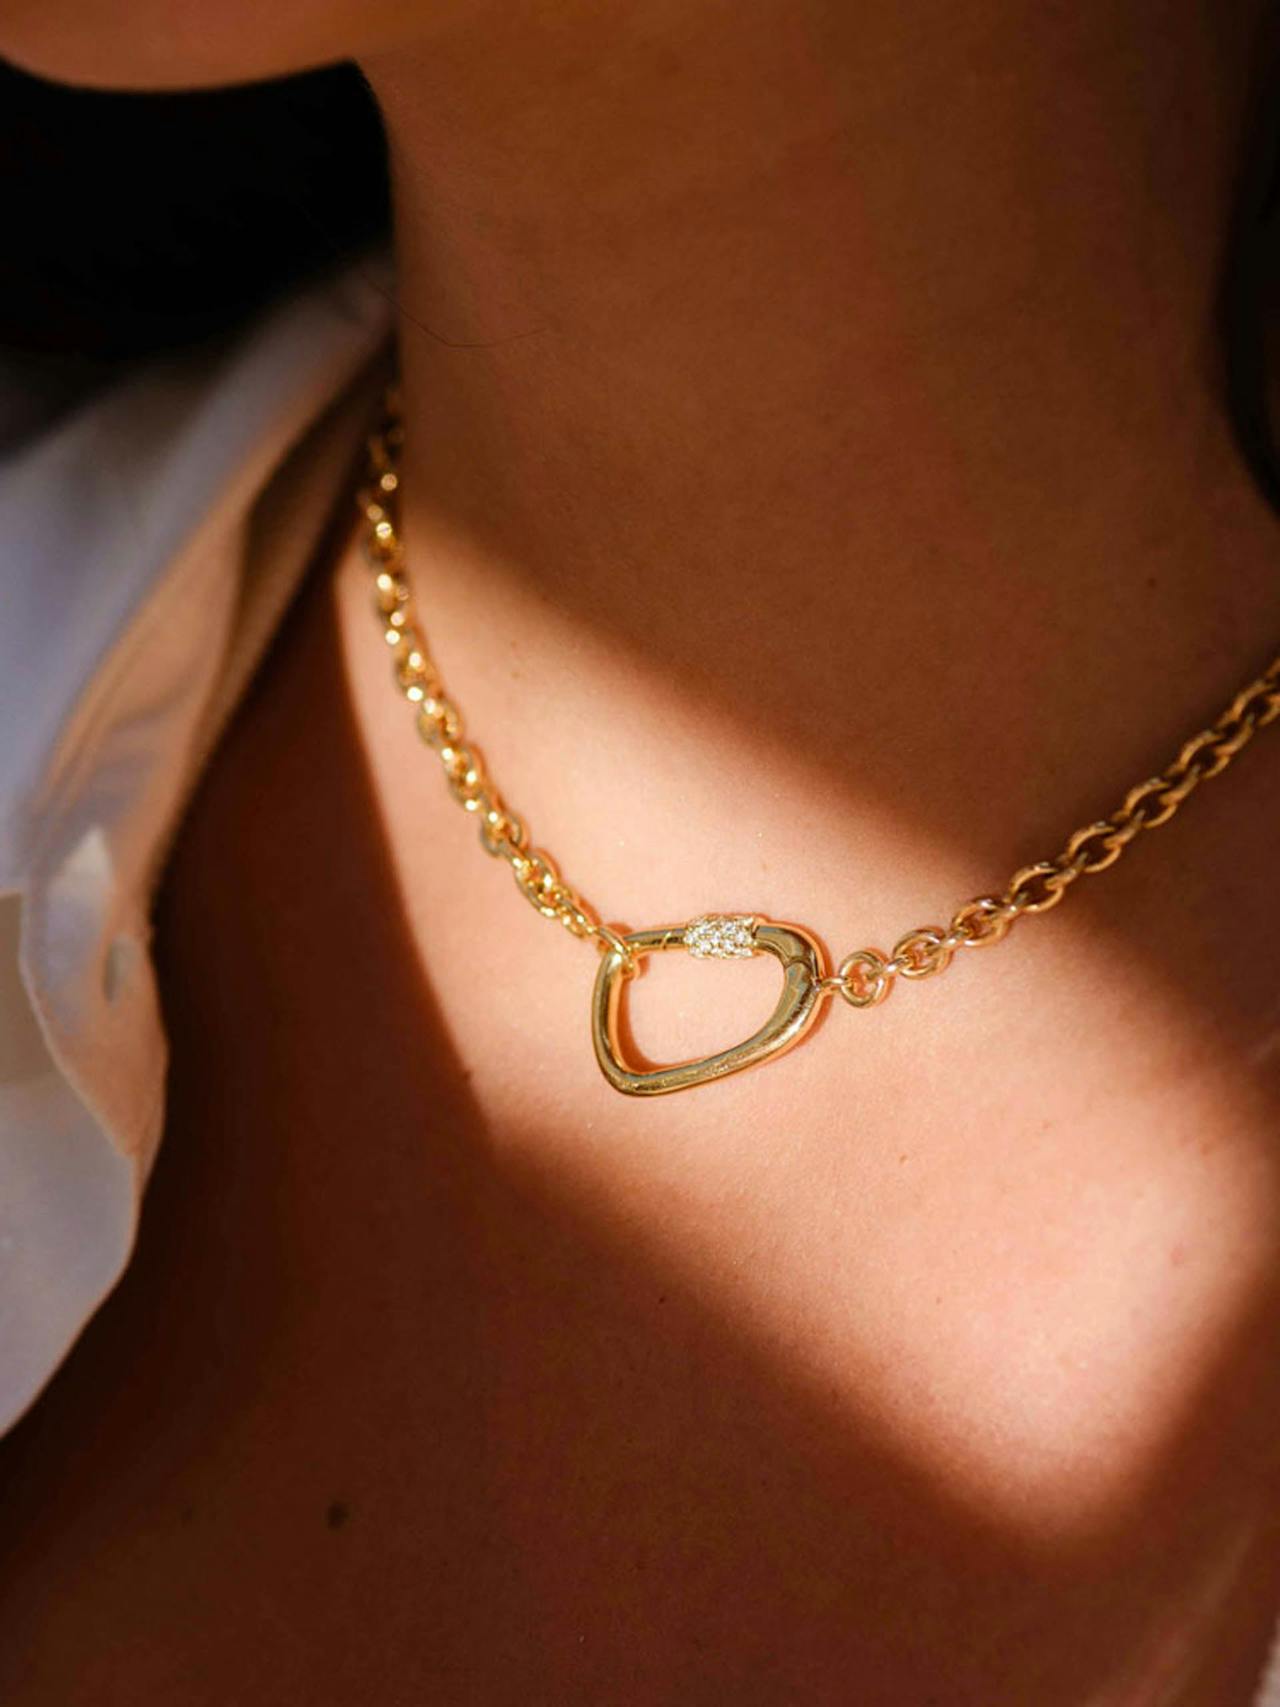 Introducing The Atlas Necklace. Suspended between an 18k recycled gold chain, a bold ornament is inspired by the organic formations of nature.